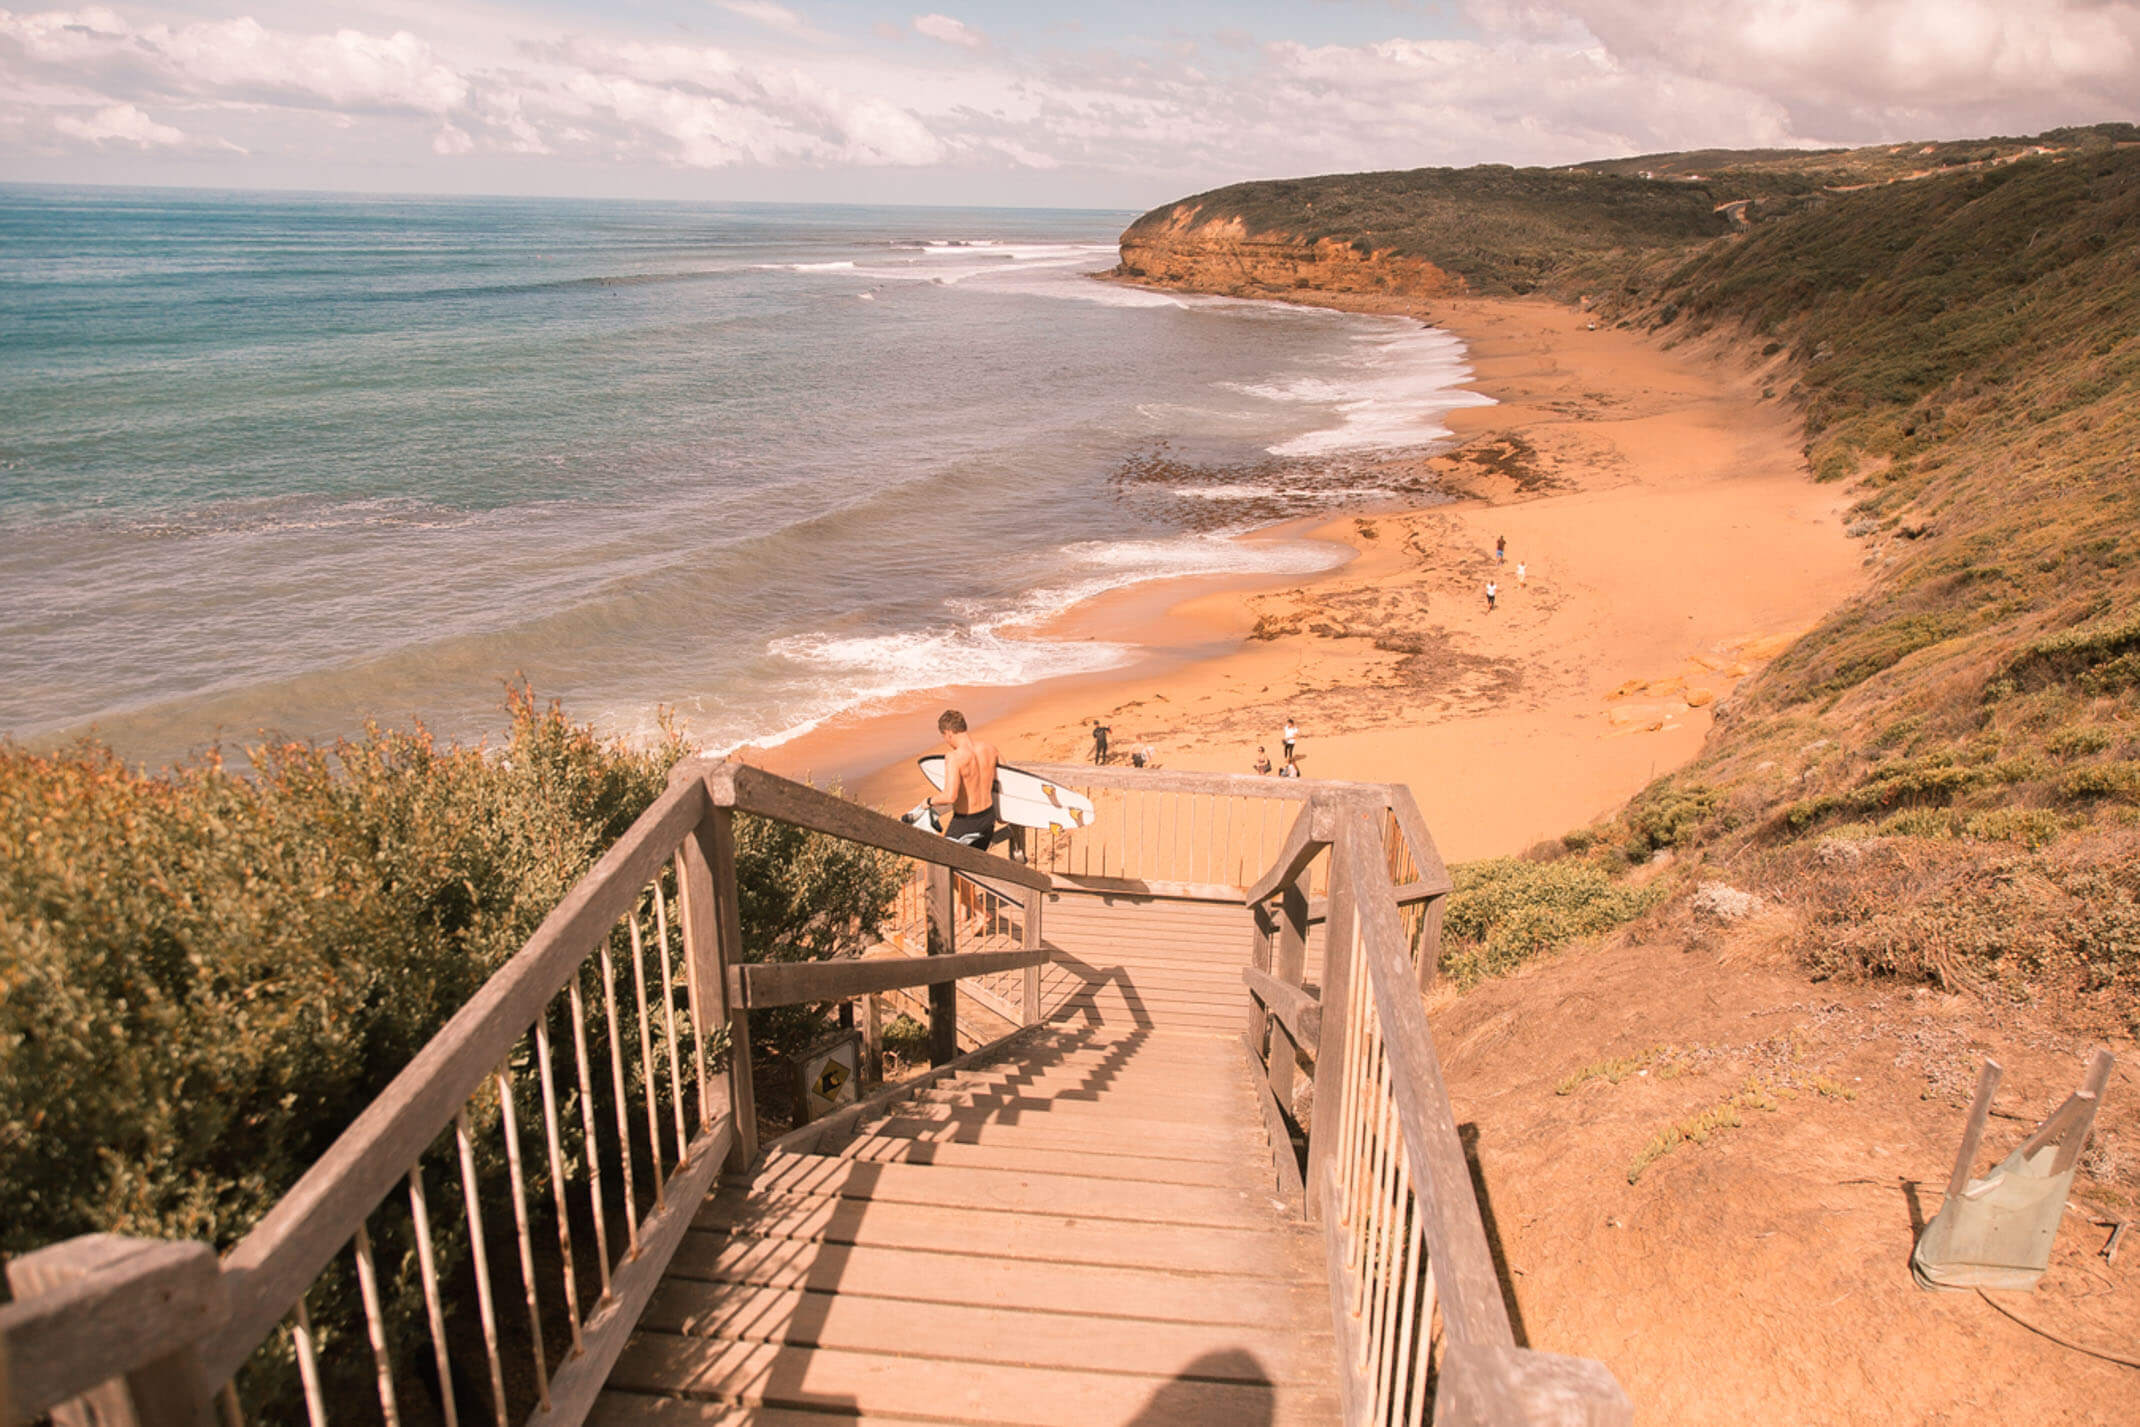 Video: A Great Ocean Road road trip from Melbourne